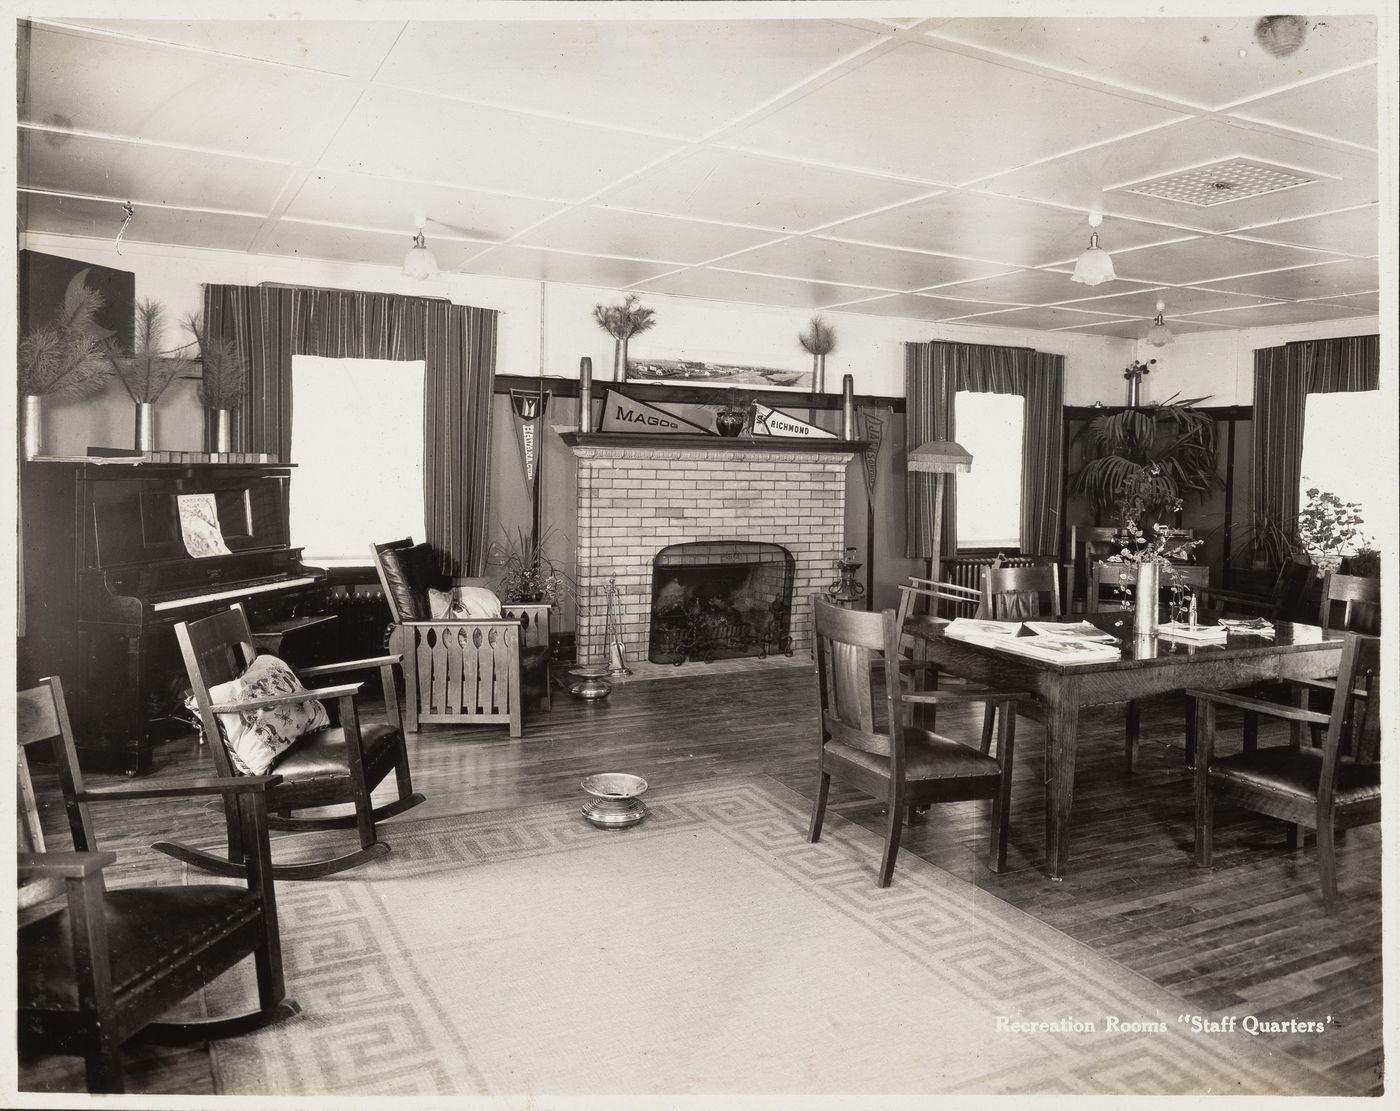 Interior view of recreation room in staff quarters at the Energite Explosives Plant No. 3, the Shell Loading Plant, Renfrew, Ontario, Canada